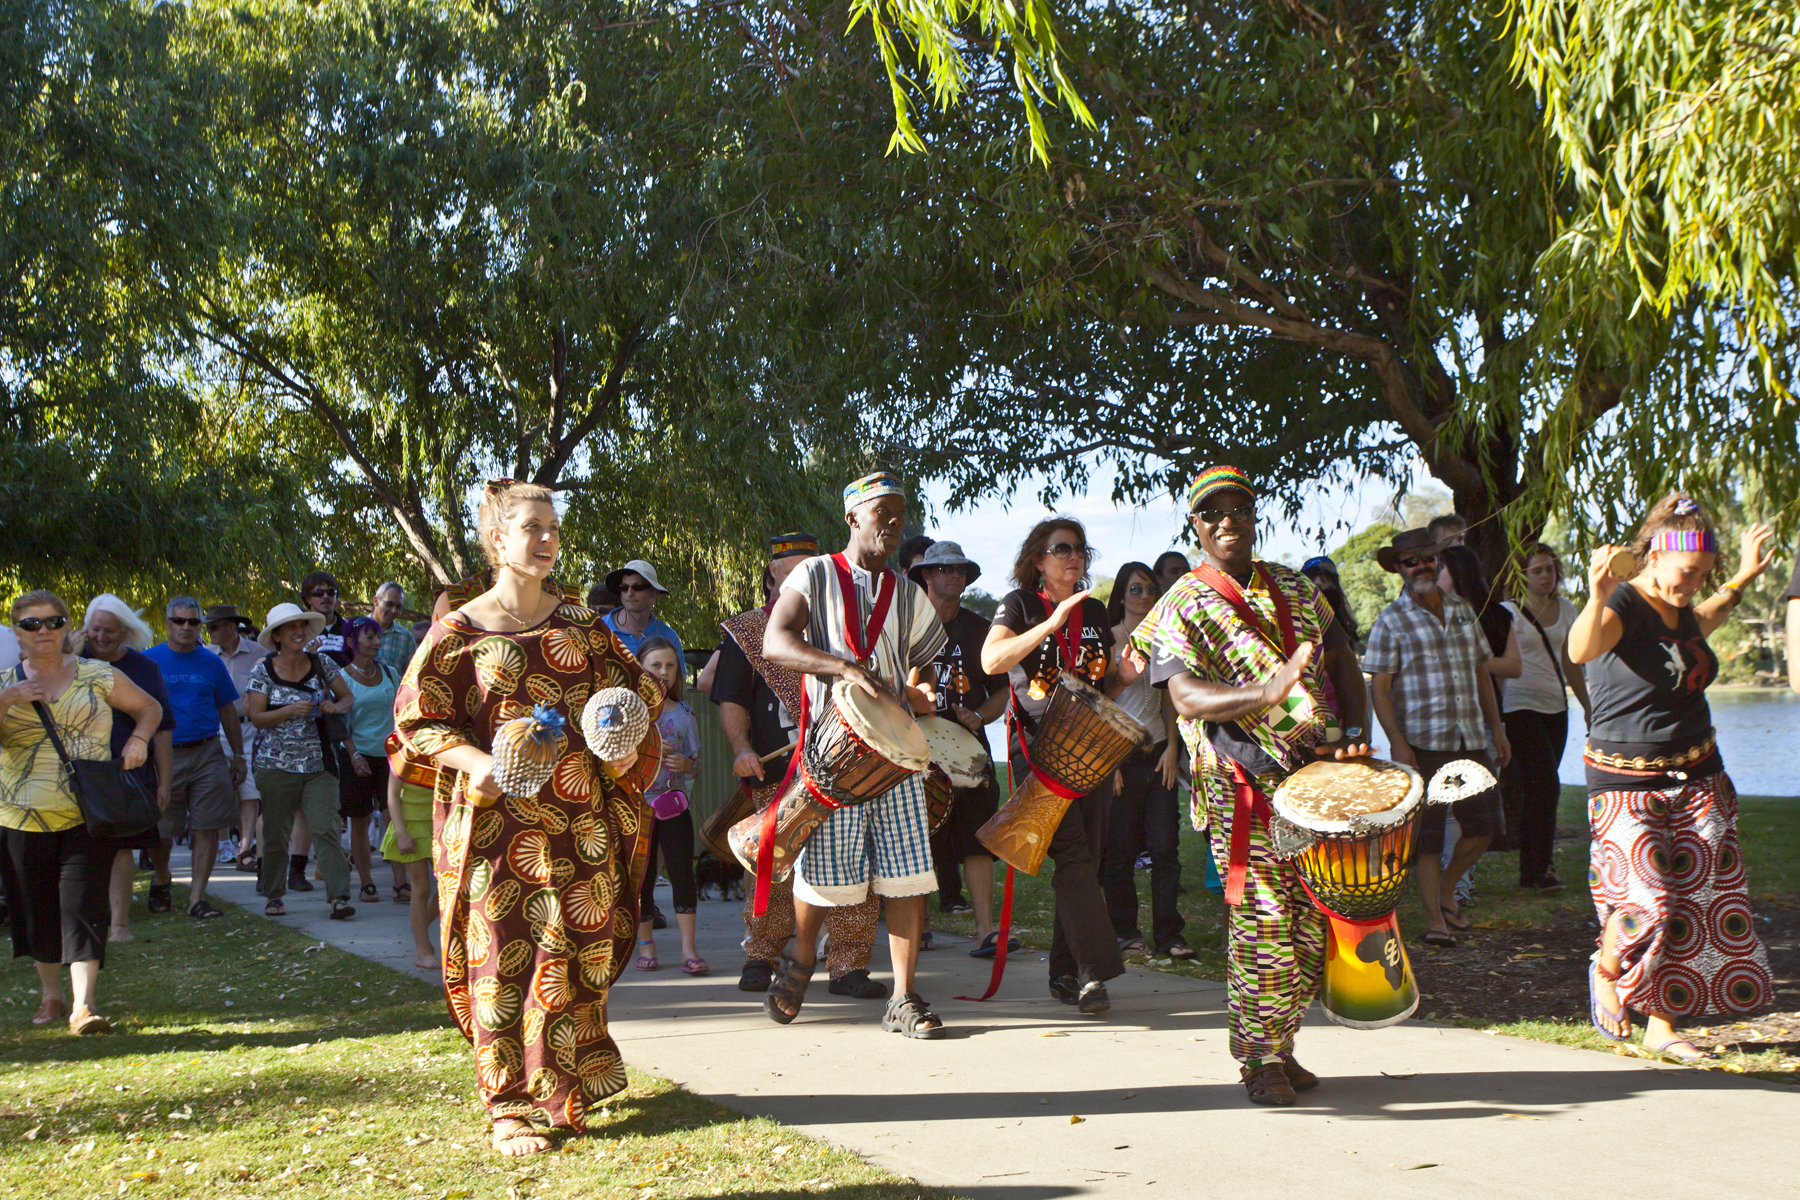 People walking and celebrating whilst drumming and shaking African maracas